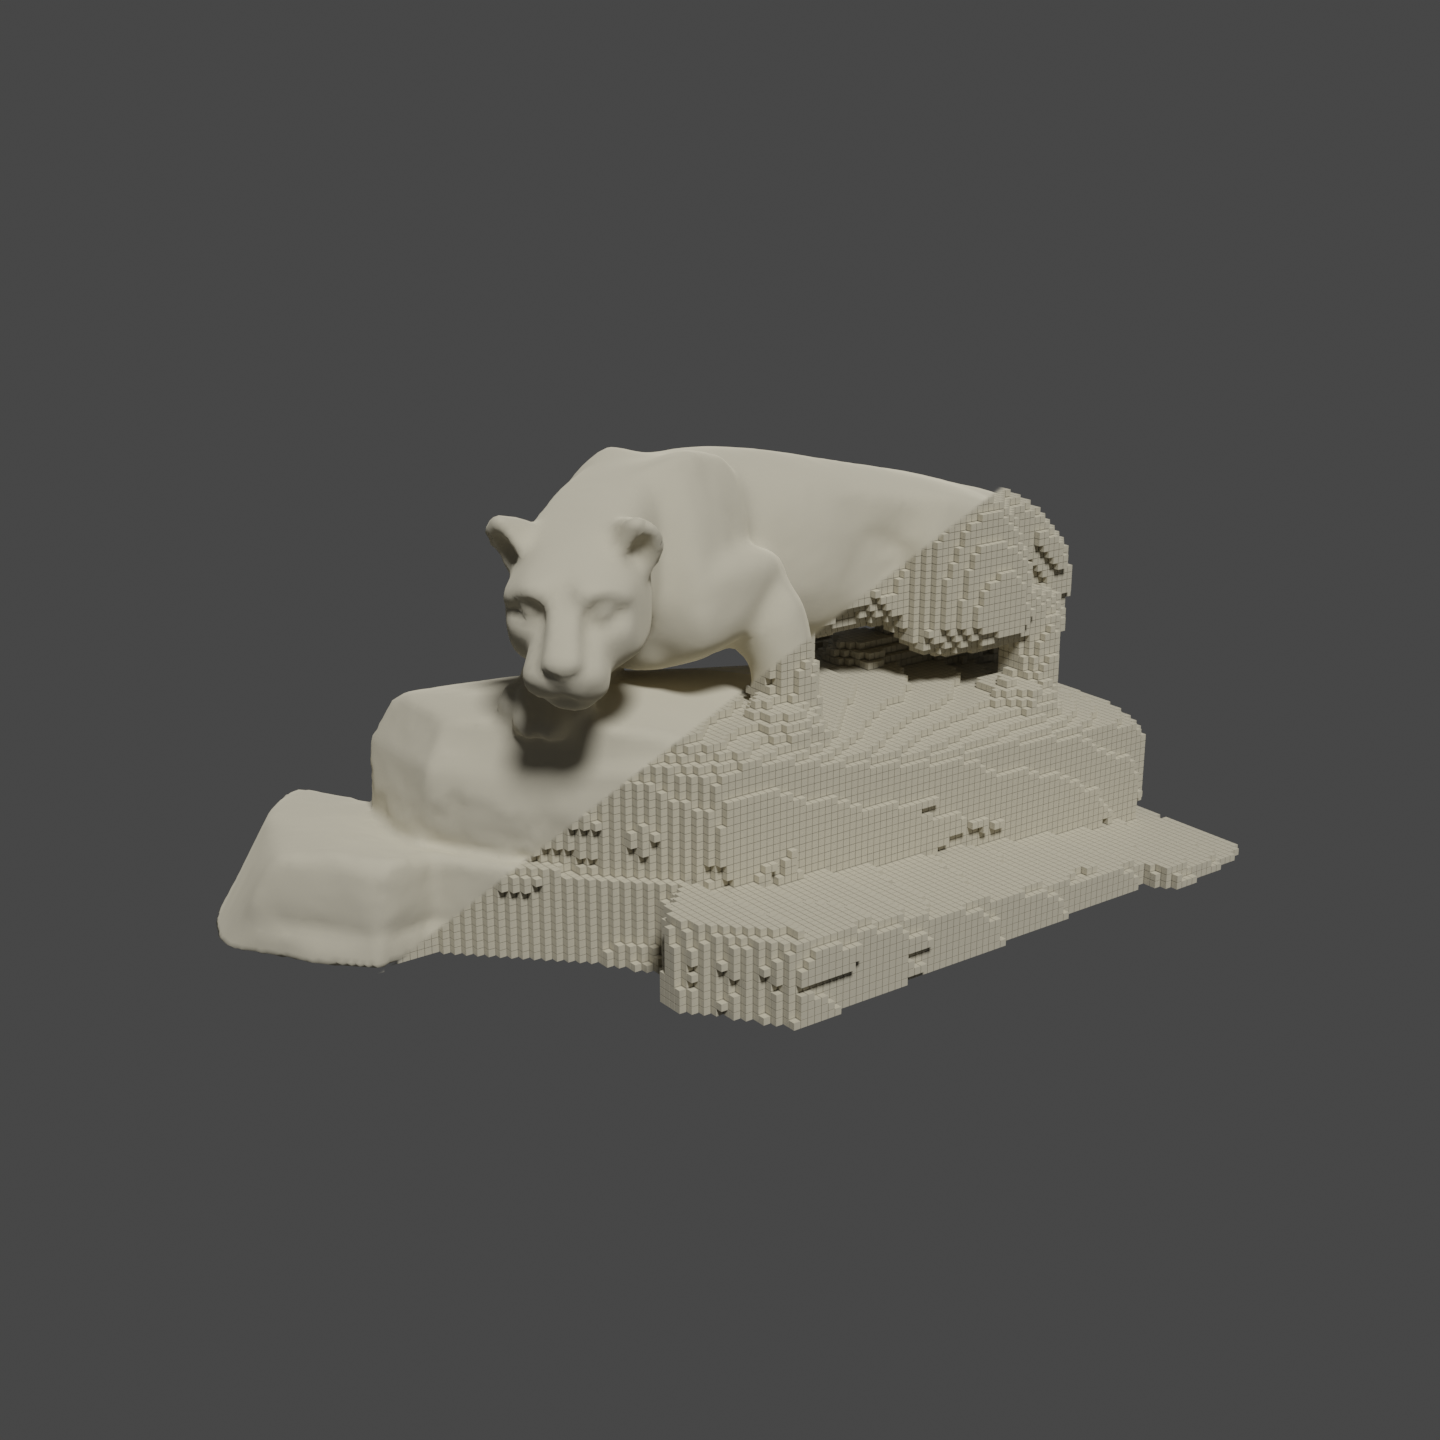 Voxelized Nittany Lion Head